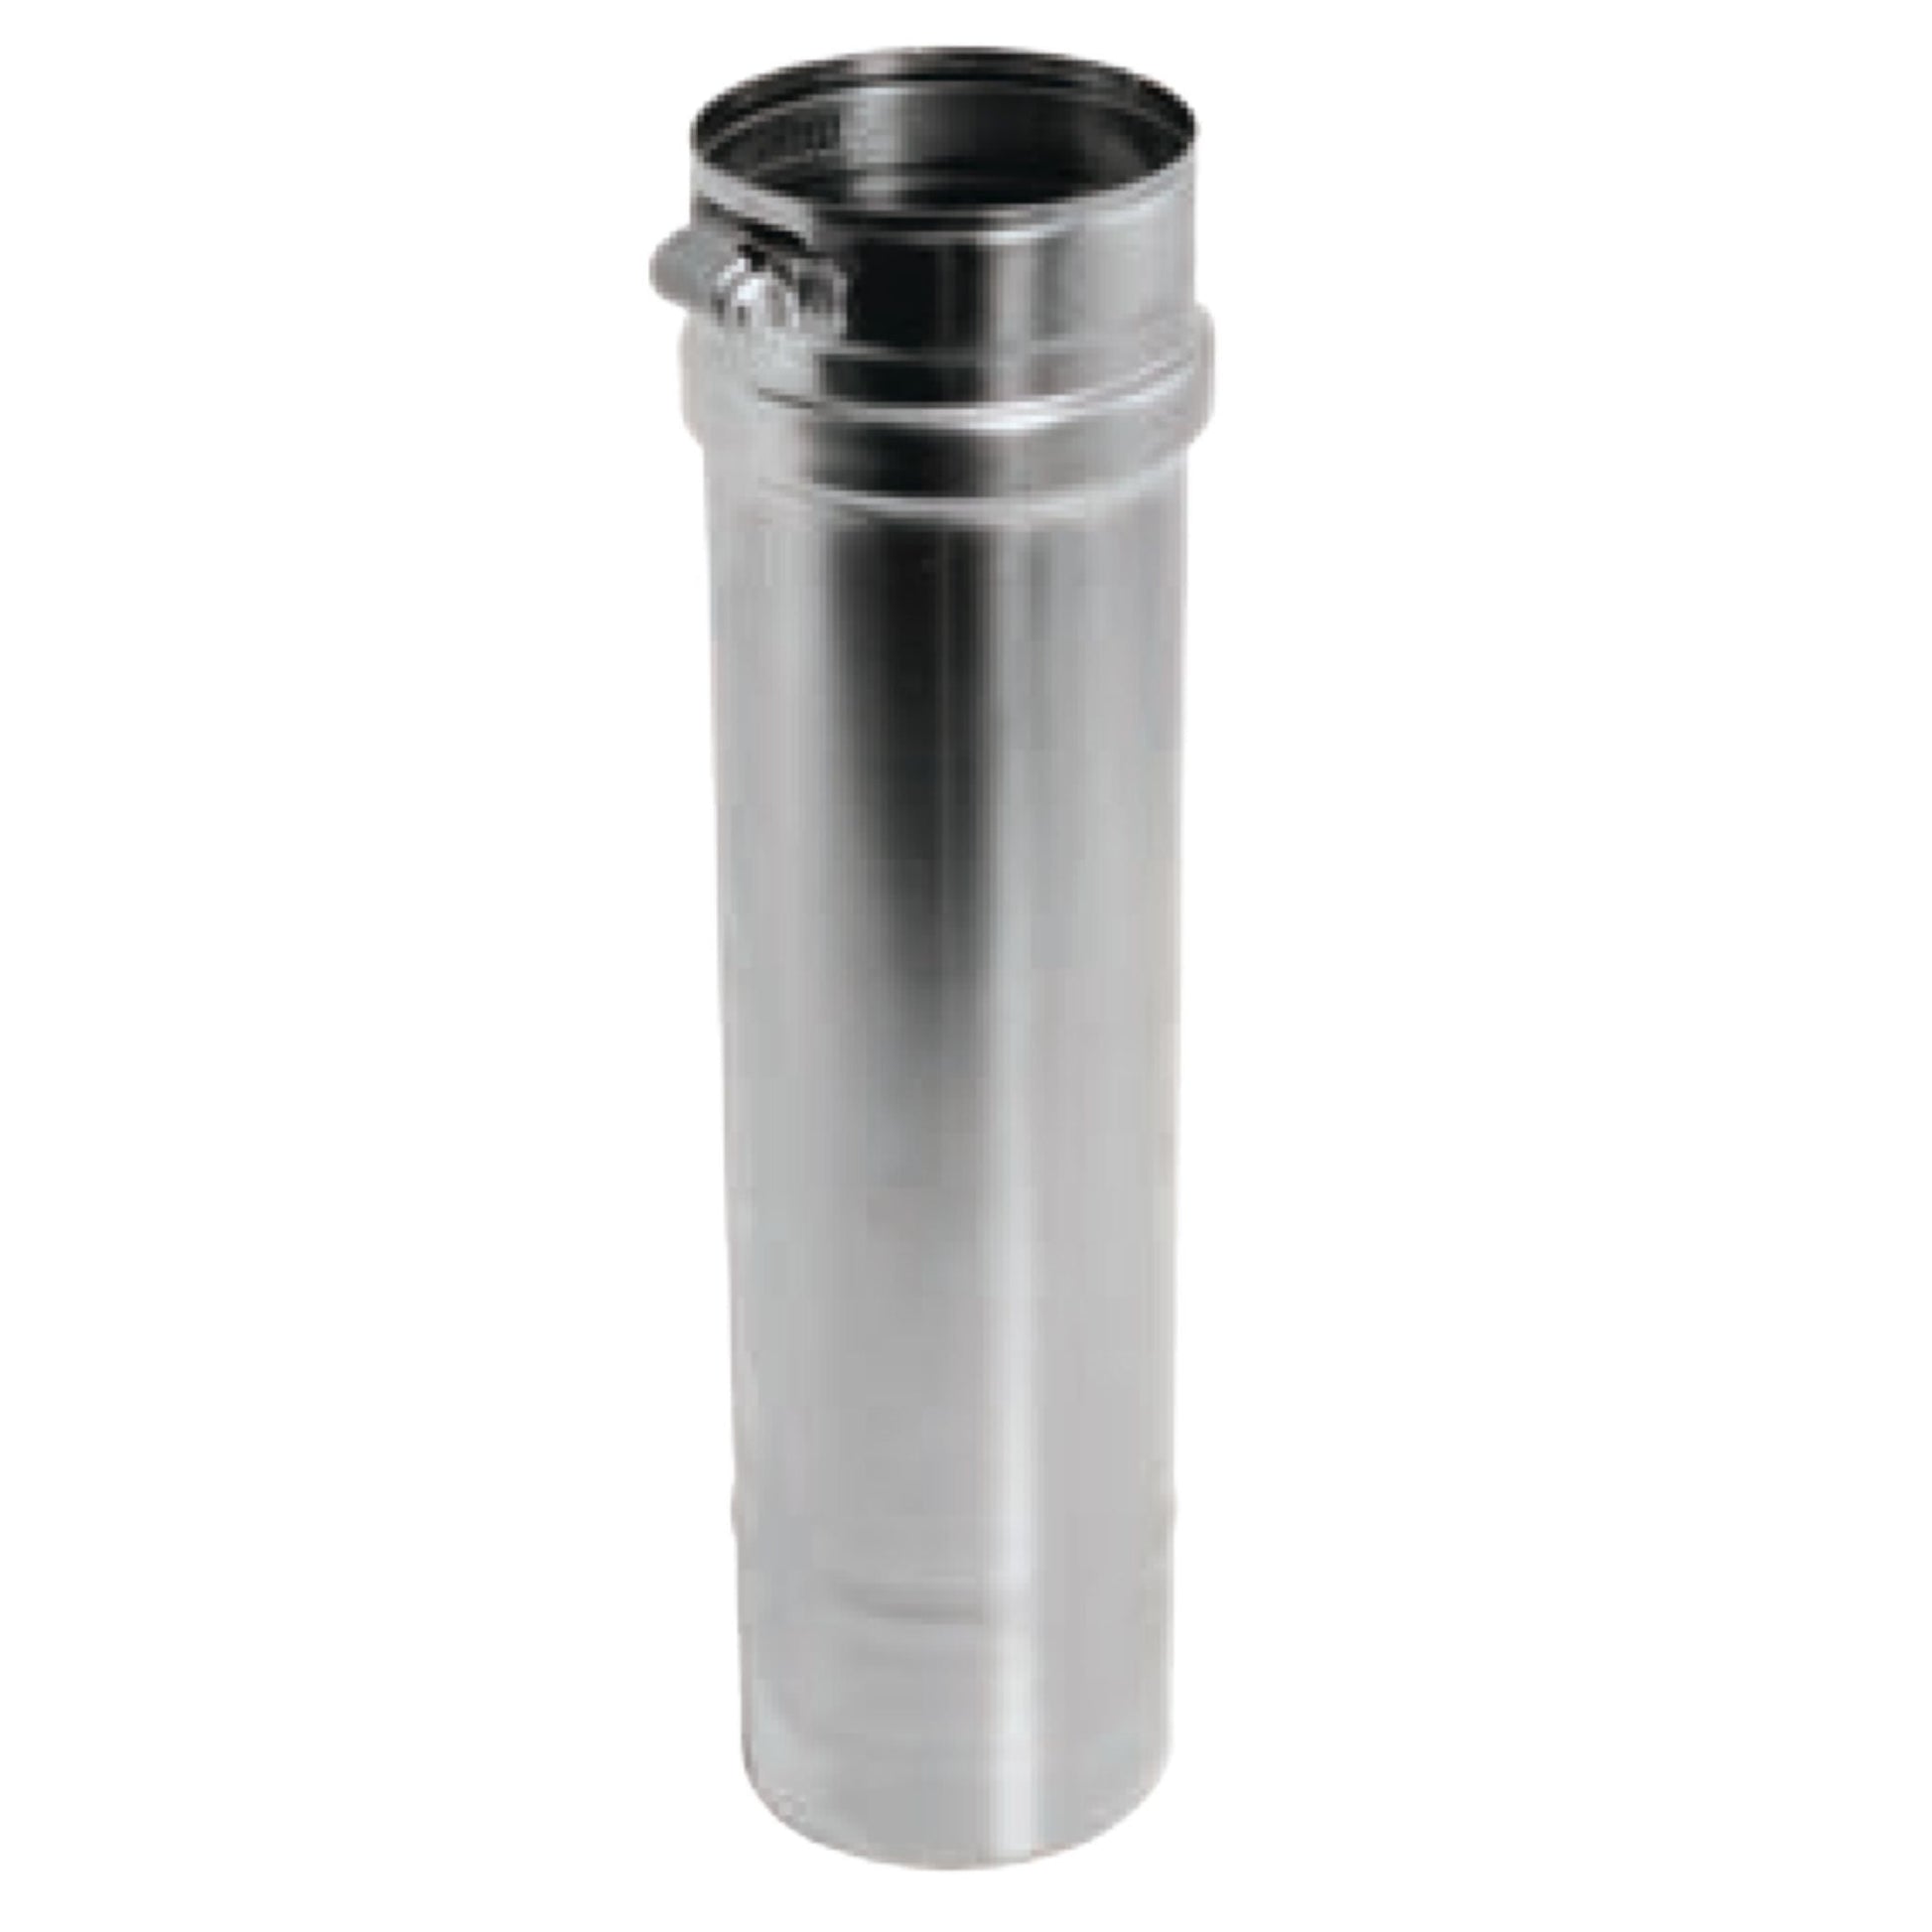 DuraVent FasNSeal 9" x 12" 316L Stainless Steel Vent Length